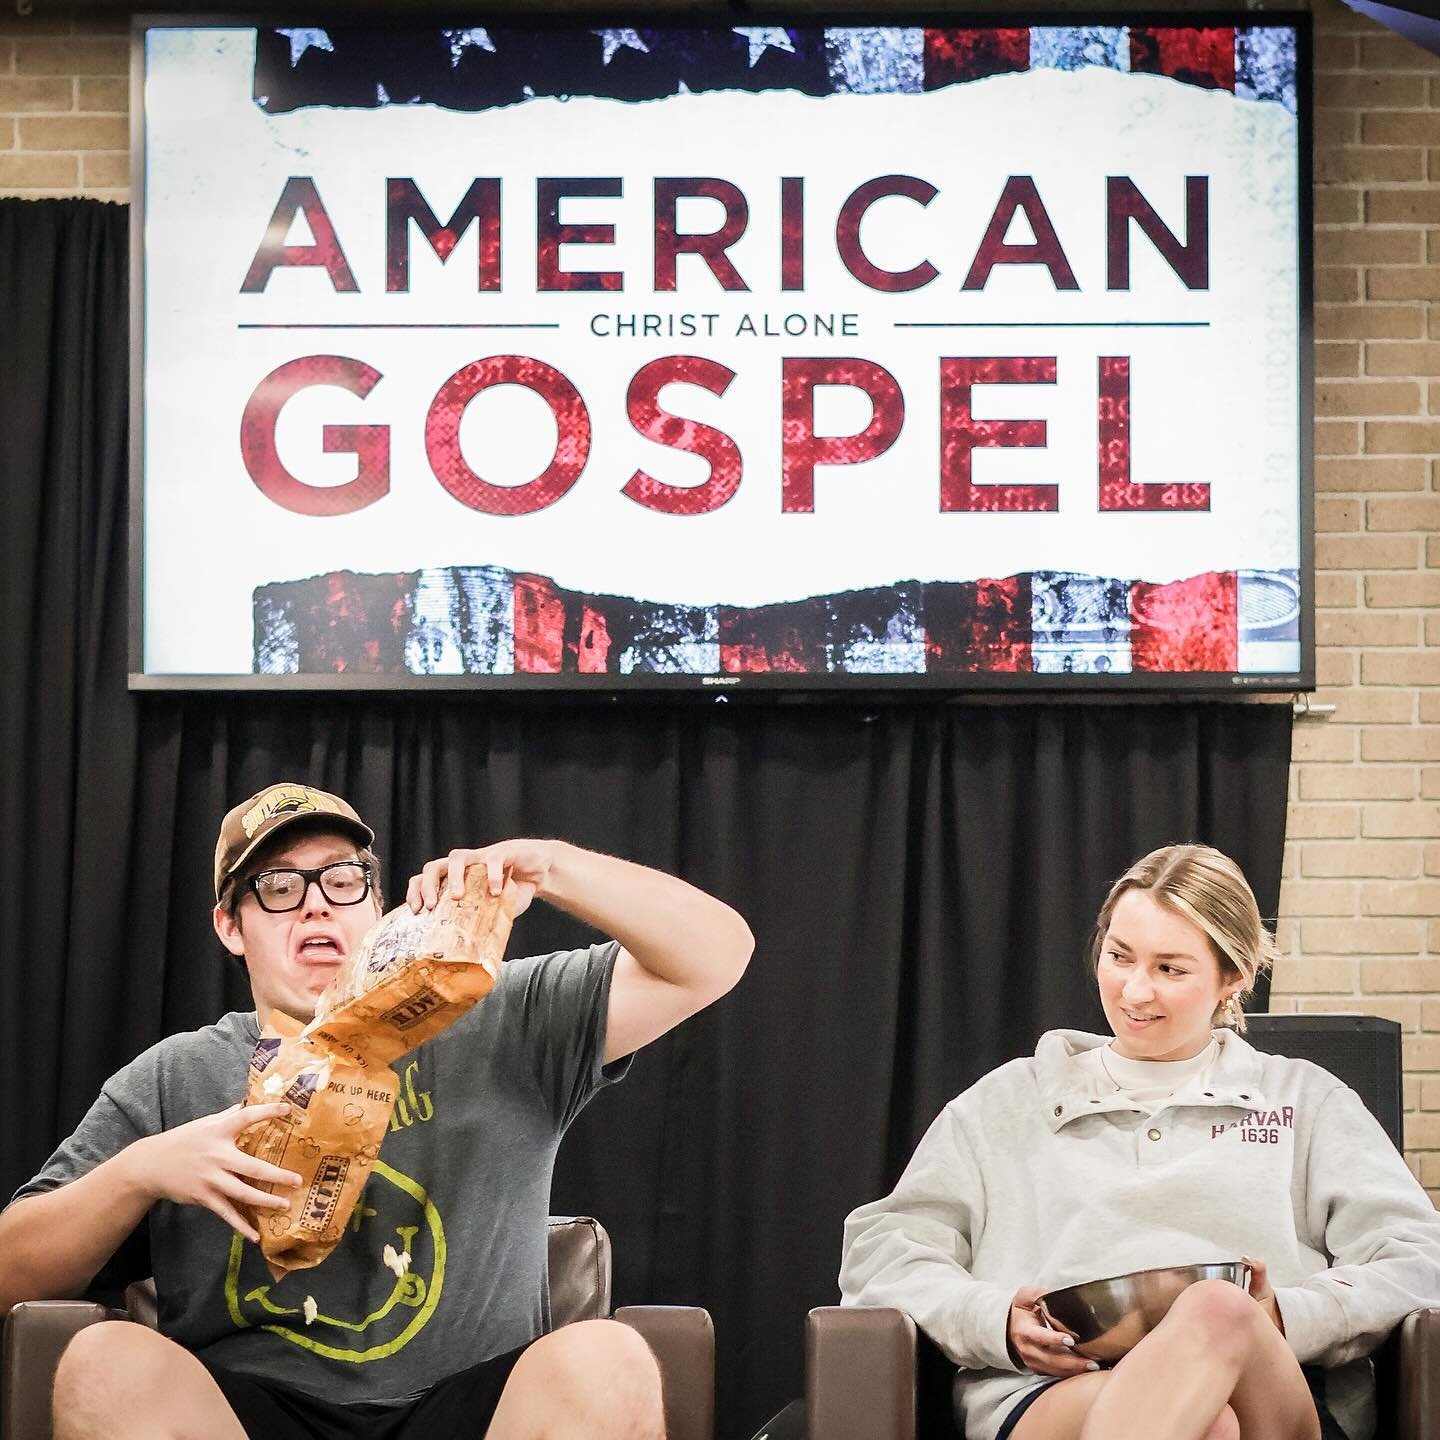 Funny photos, awesome snacks, serious documentary. Tonight at 7pm!

American Gospel: Christ Alone examines how the prosperity gospel and other works based beliefs systems have distorted the gospel message.